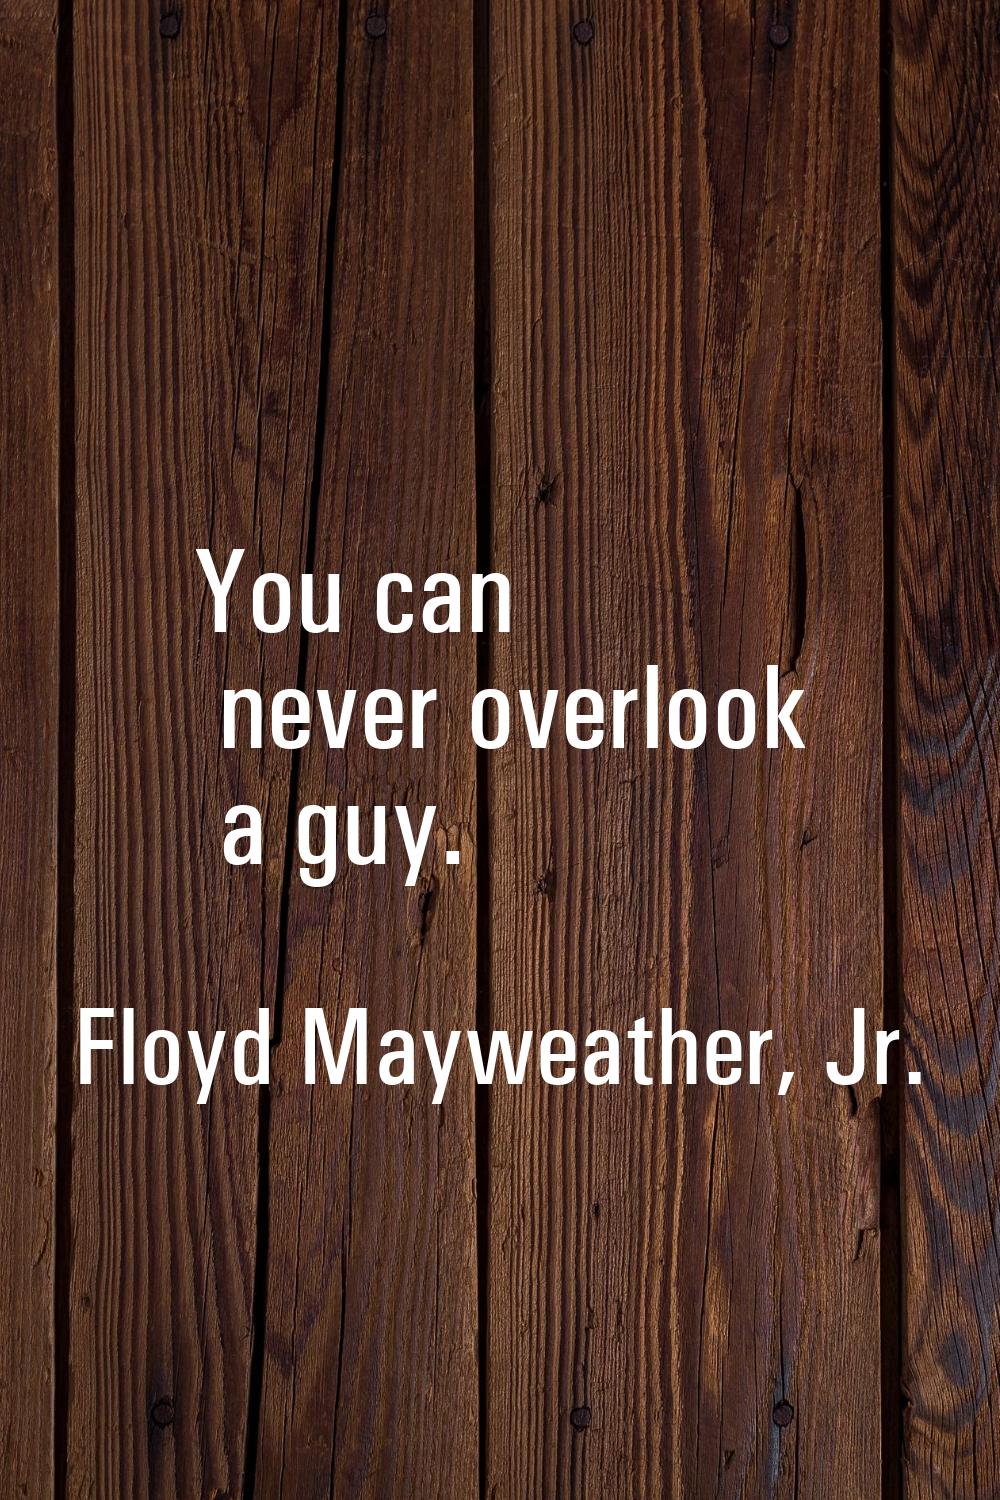 You can never overlook a guy.